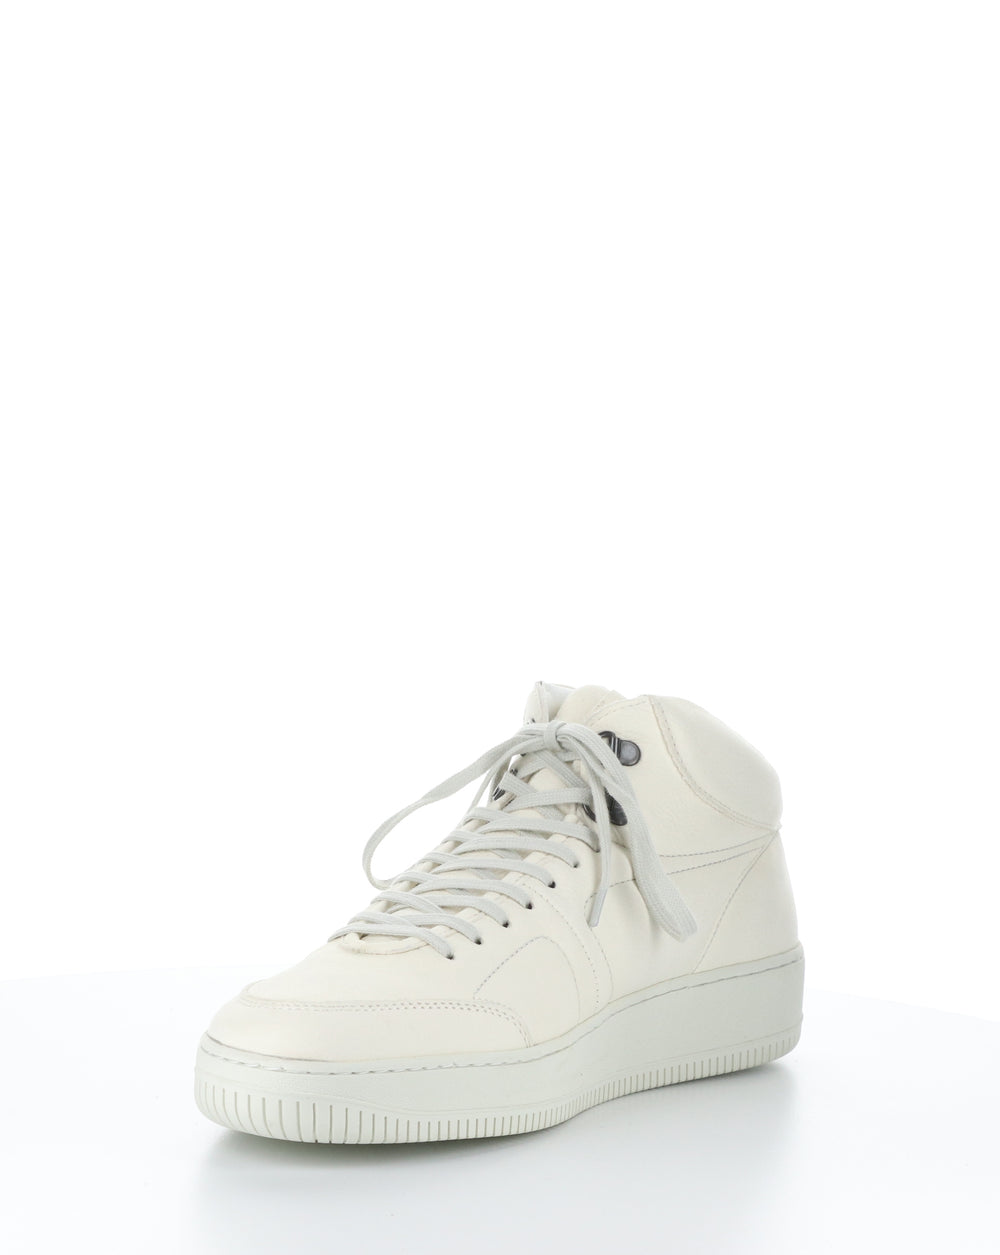 BEAP543FLY 001 OFF WHITE Hi-Top Shoes